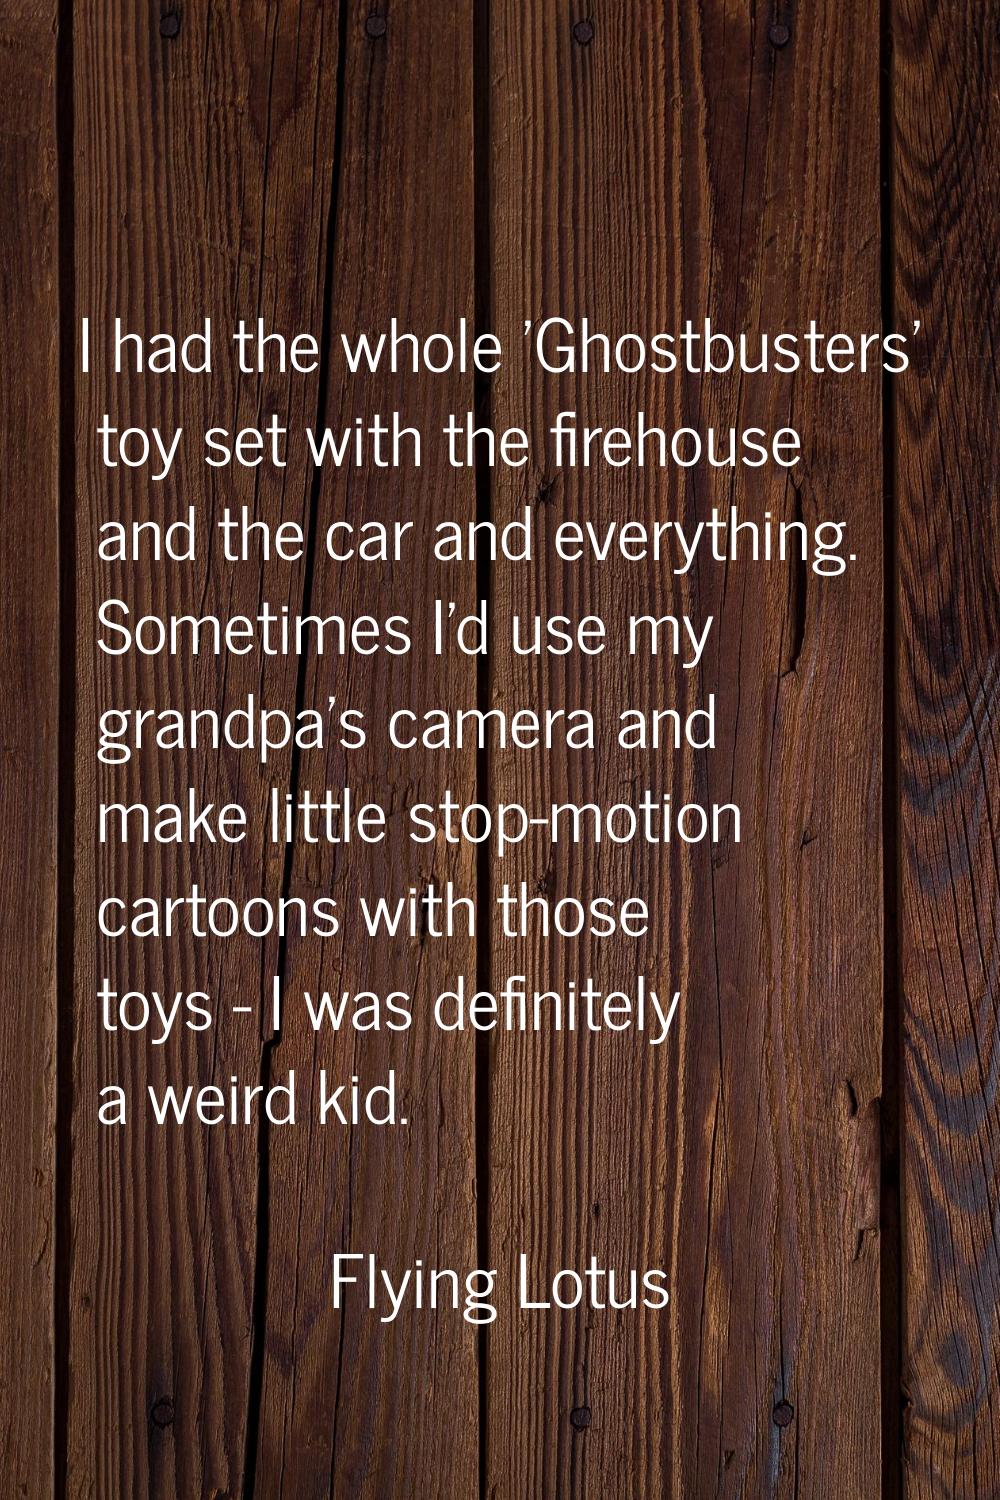 I had the whole 'Ghostbusters' toy set with the firehouse and the car and everything. Sometimes I'd